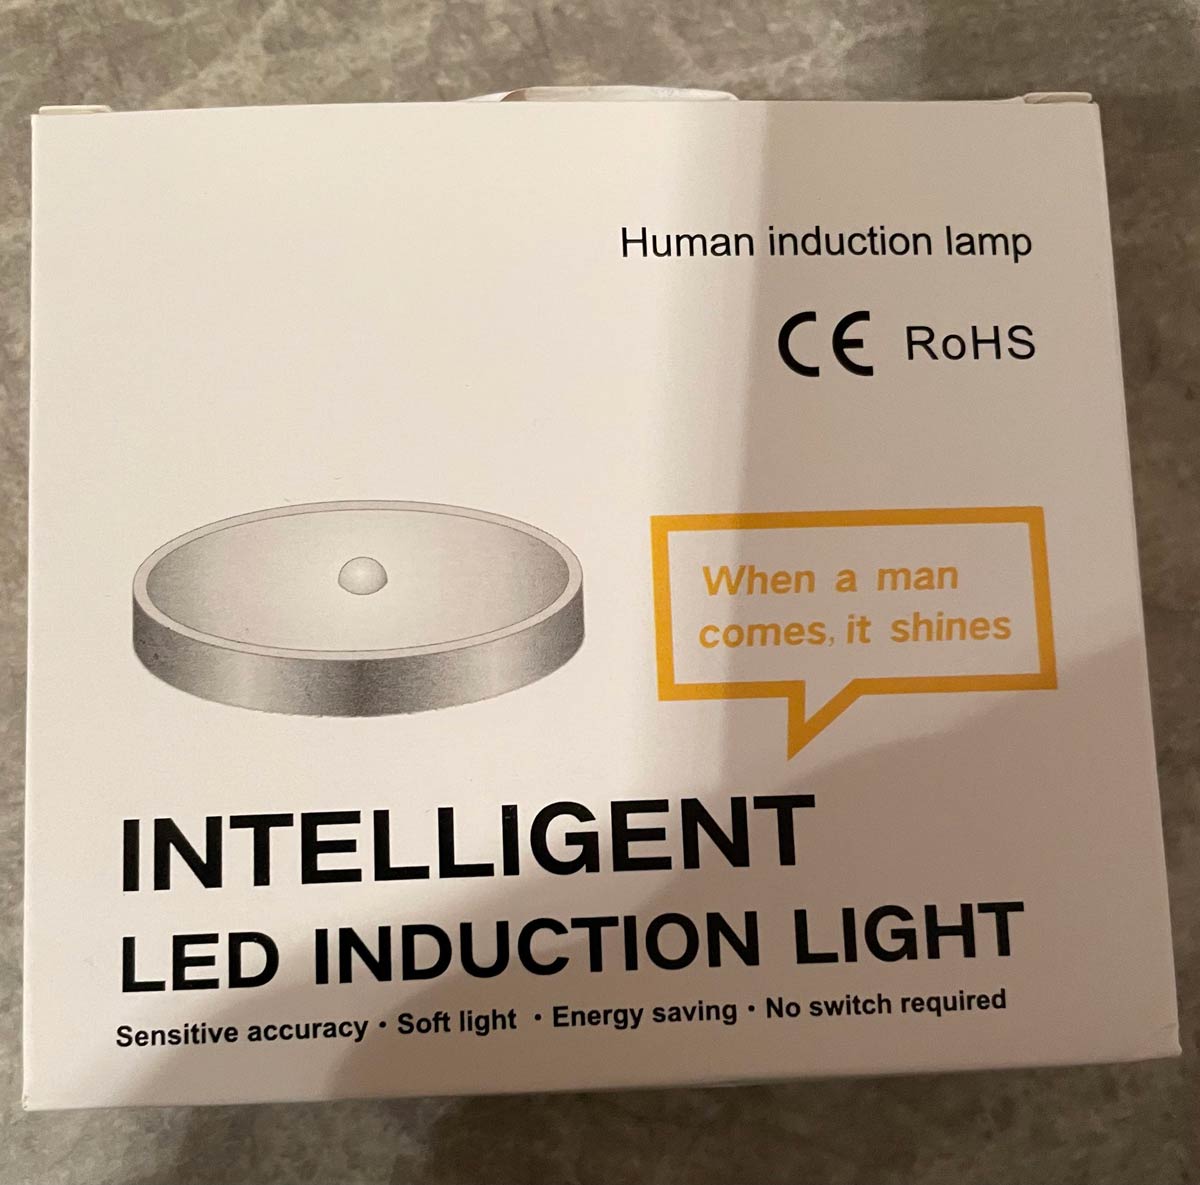 I think the slogan on this light I bought needs a rethink